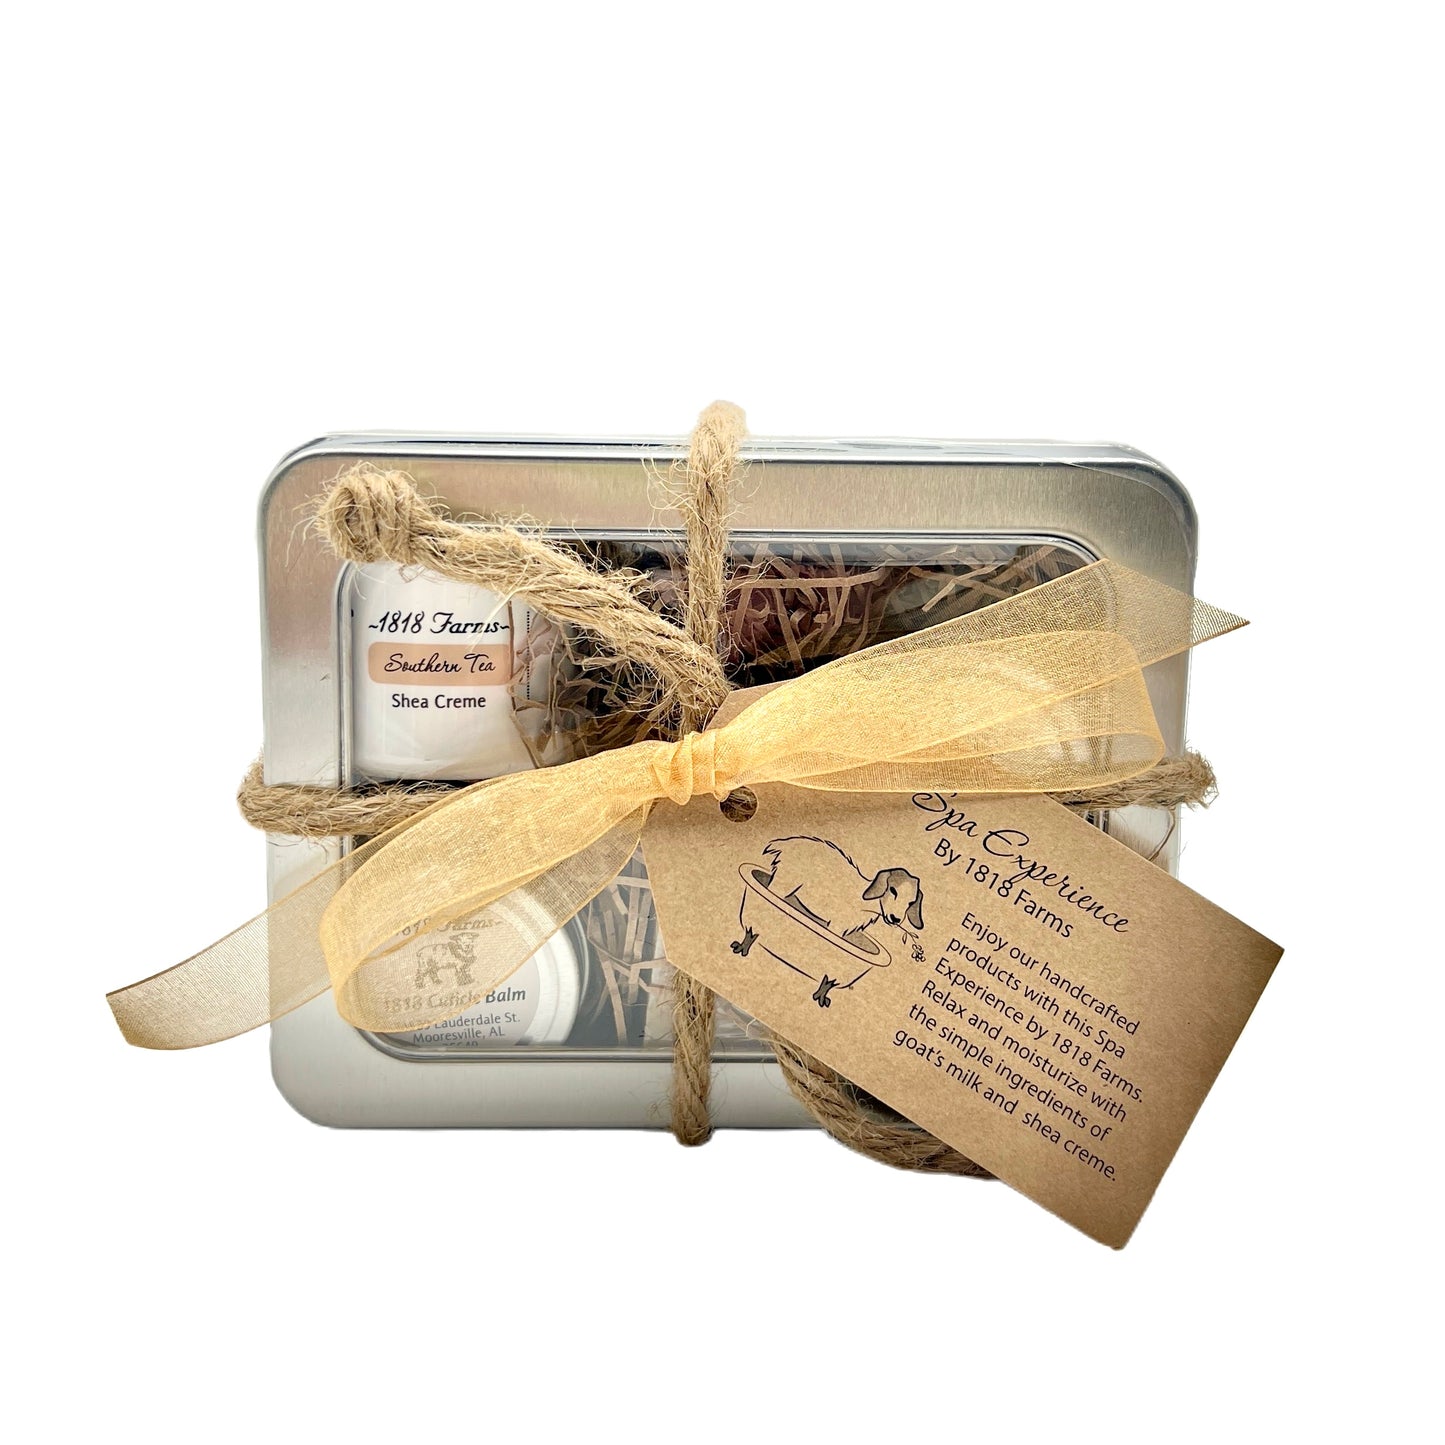 Spa Experience by 1818 Farms - Head to Toe Gift Basket 1818 Farms   